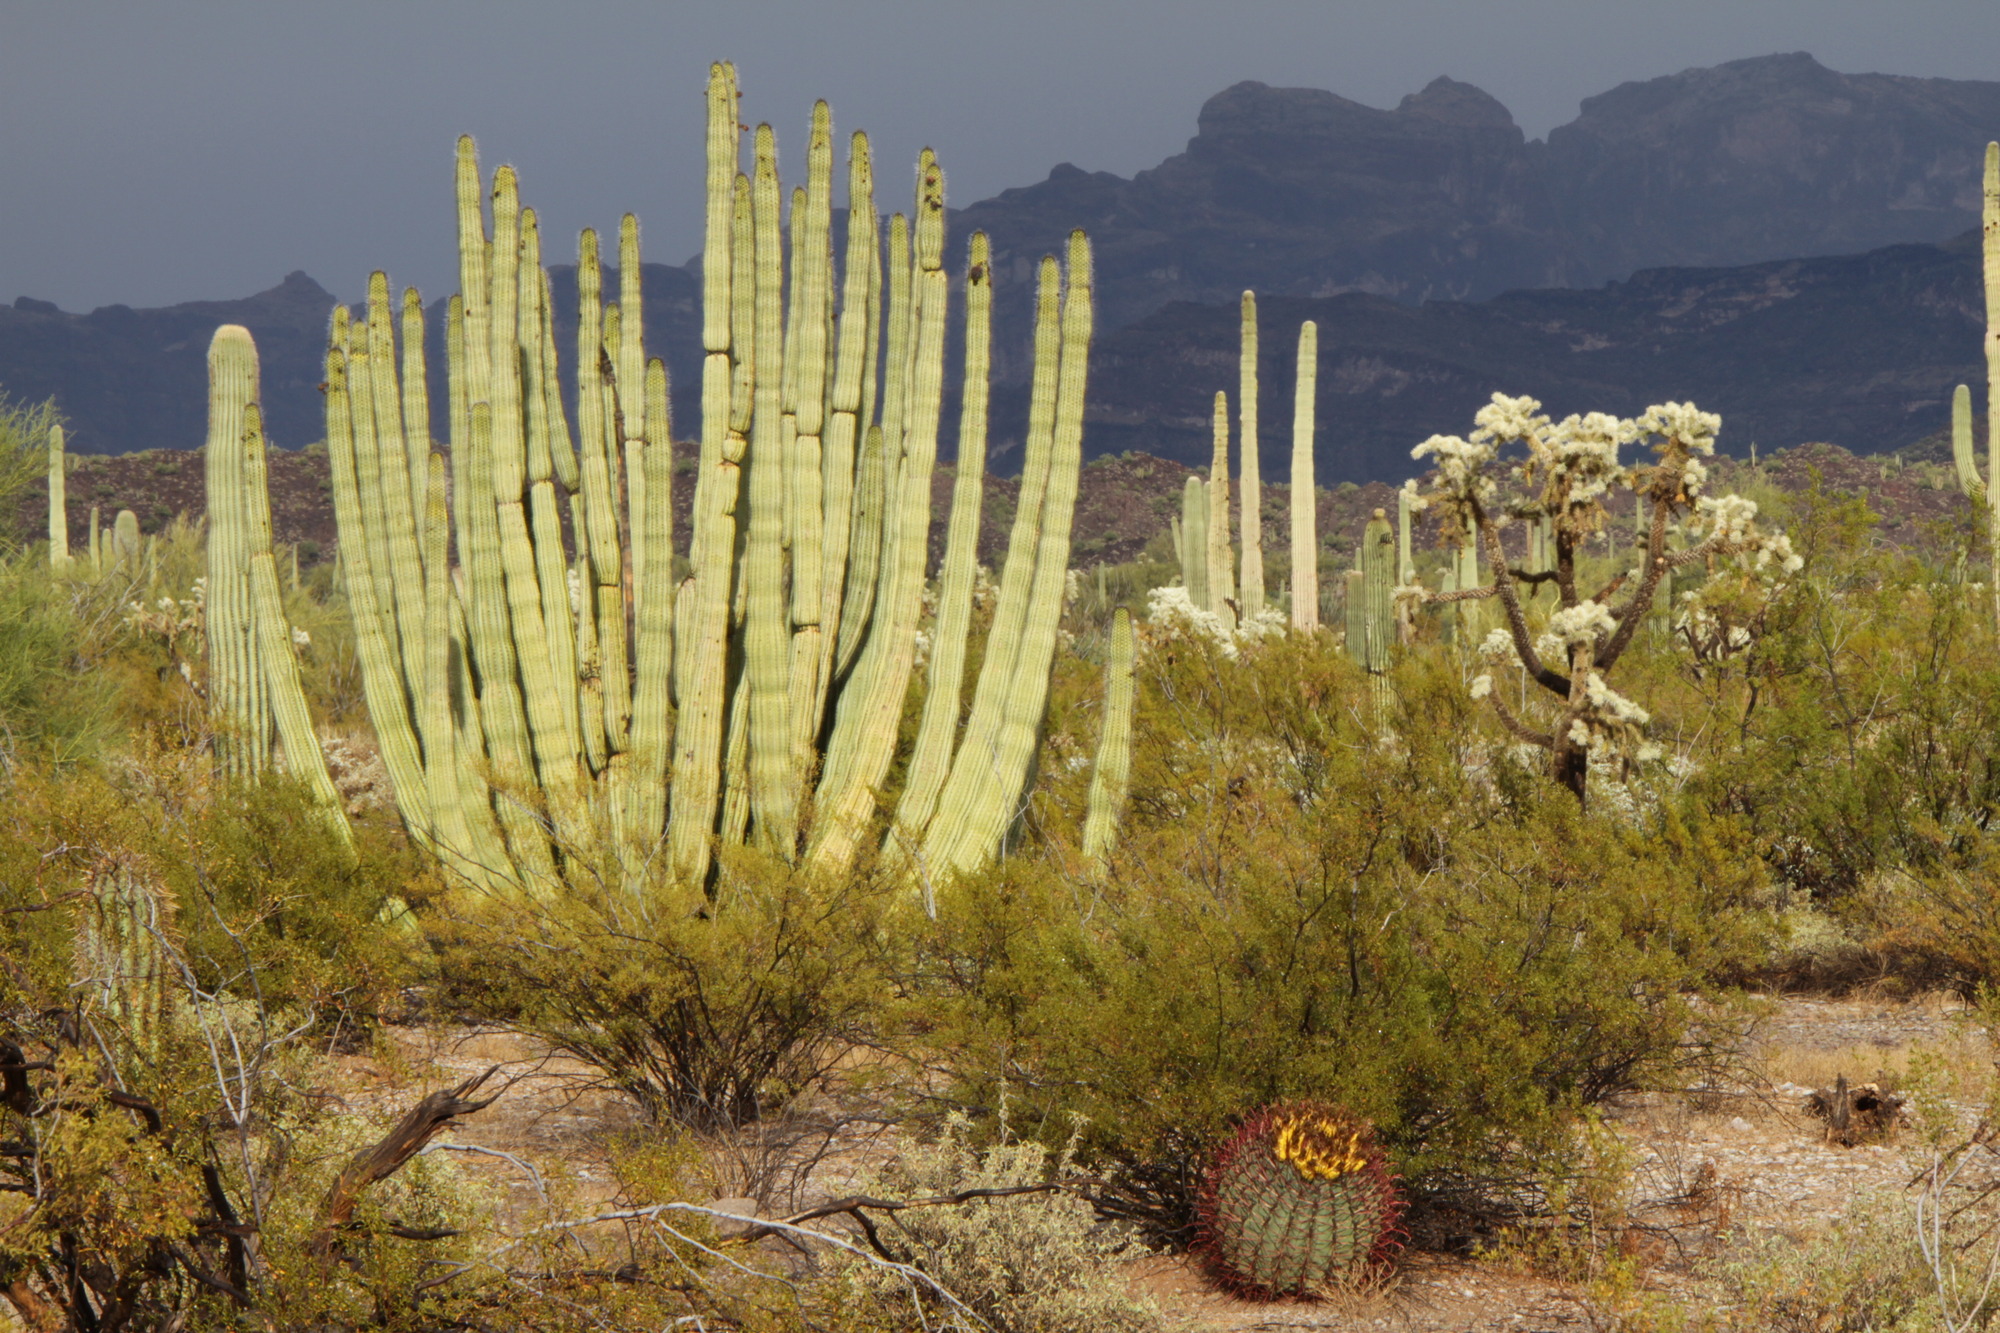 A large organ pipe cactus surrounded by creosote, cholla, and a barrel cactus nearby.